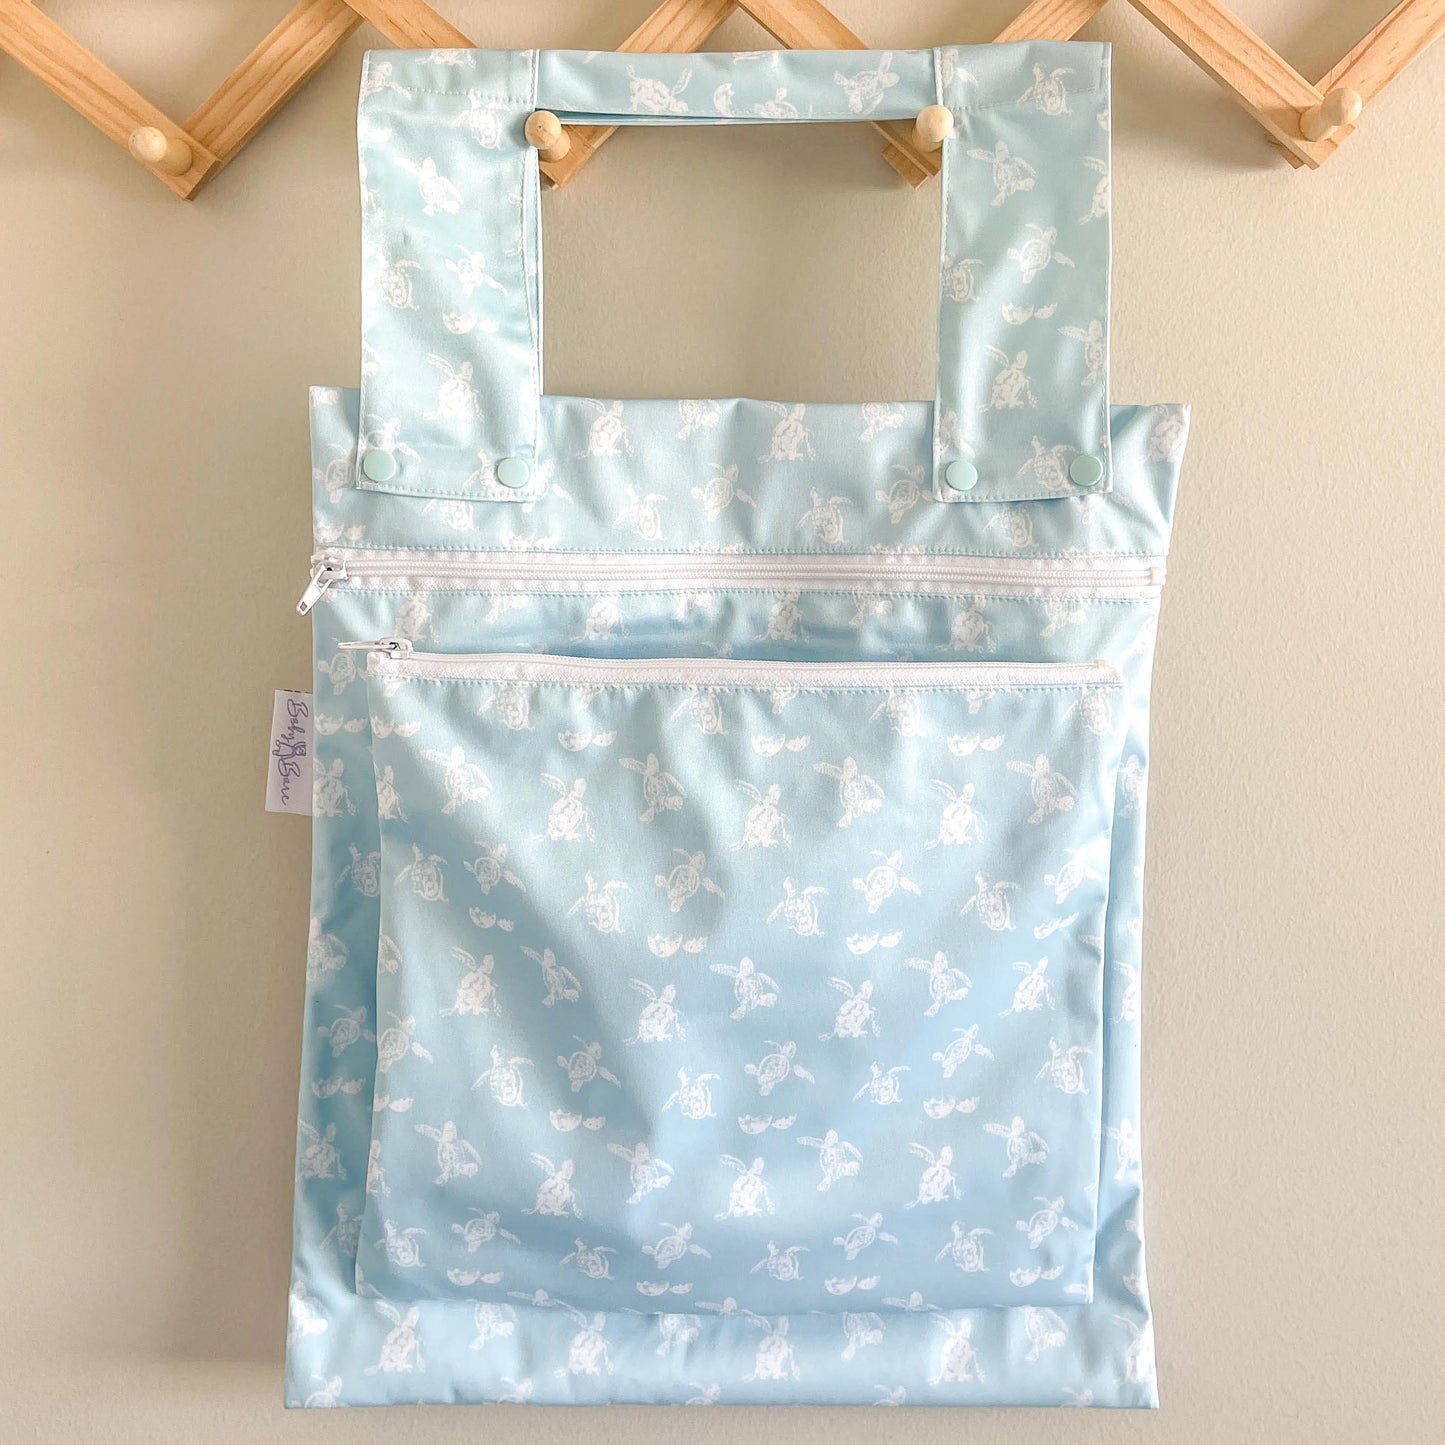 Load image into Gallery viewer, Wet Bag - Double - Nursery Classics Collection - Baby Bare Cloth Nappies
